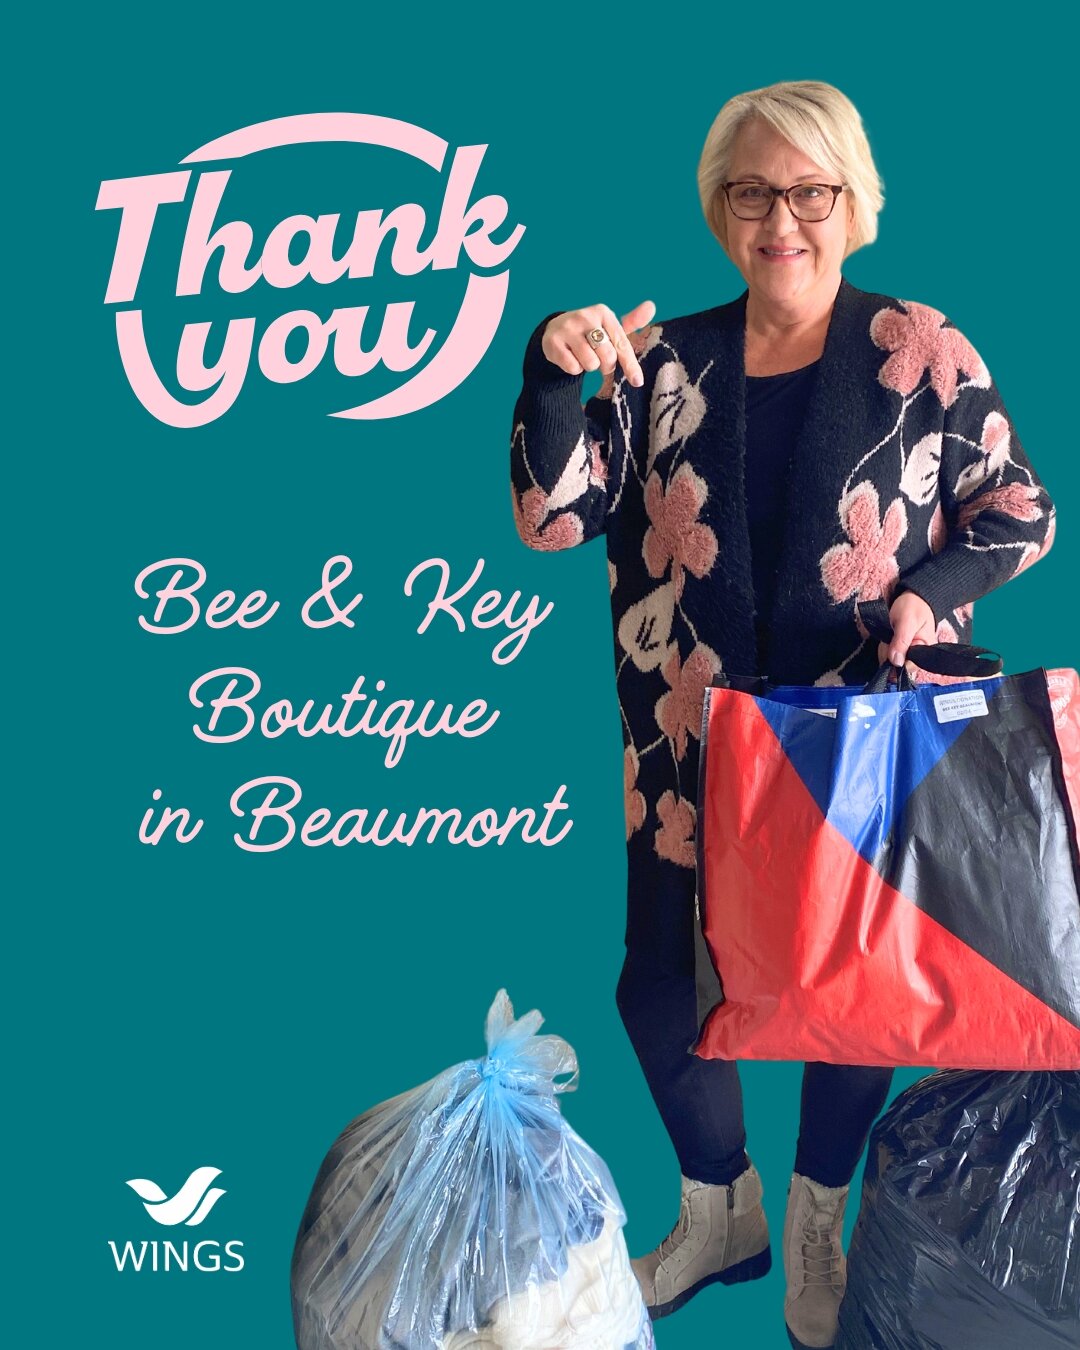 Thank you to @beekeybeaumont for being a supporter of WINGS!  We are thrilled that your boutique is providing ongoing clothing donations for the women at WINGS, as well as helping to spread awareness about WINGS to your customers and community. 

Thi